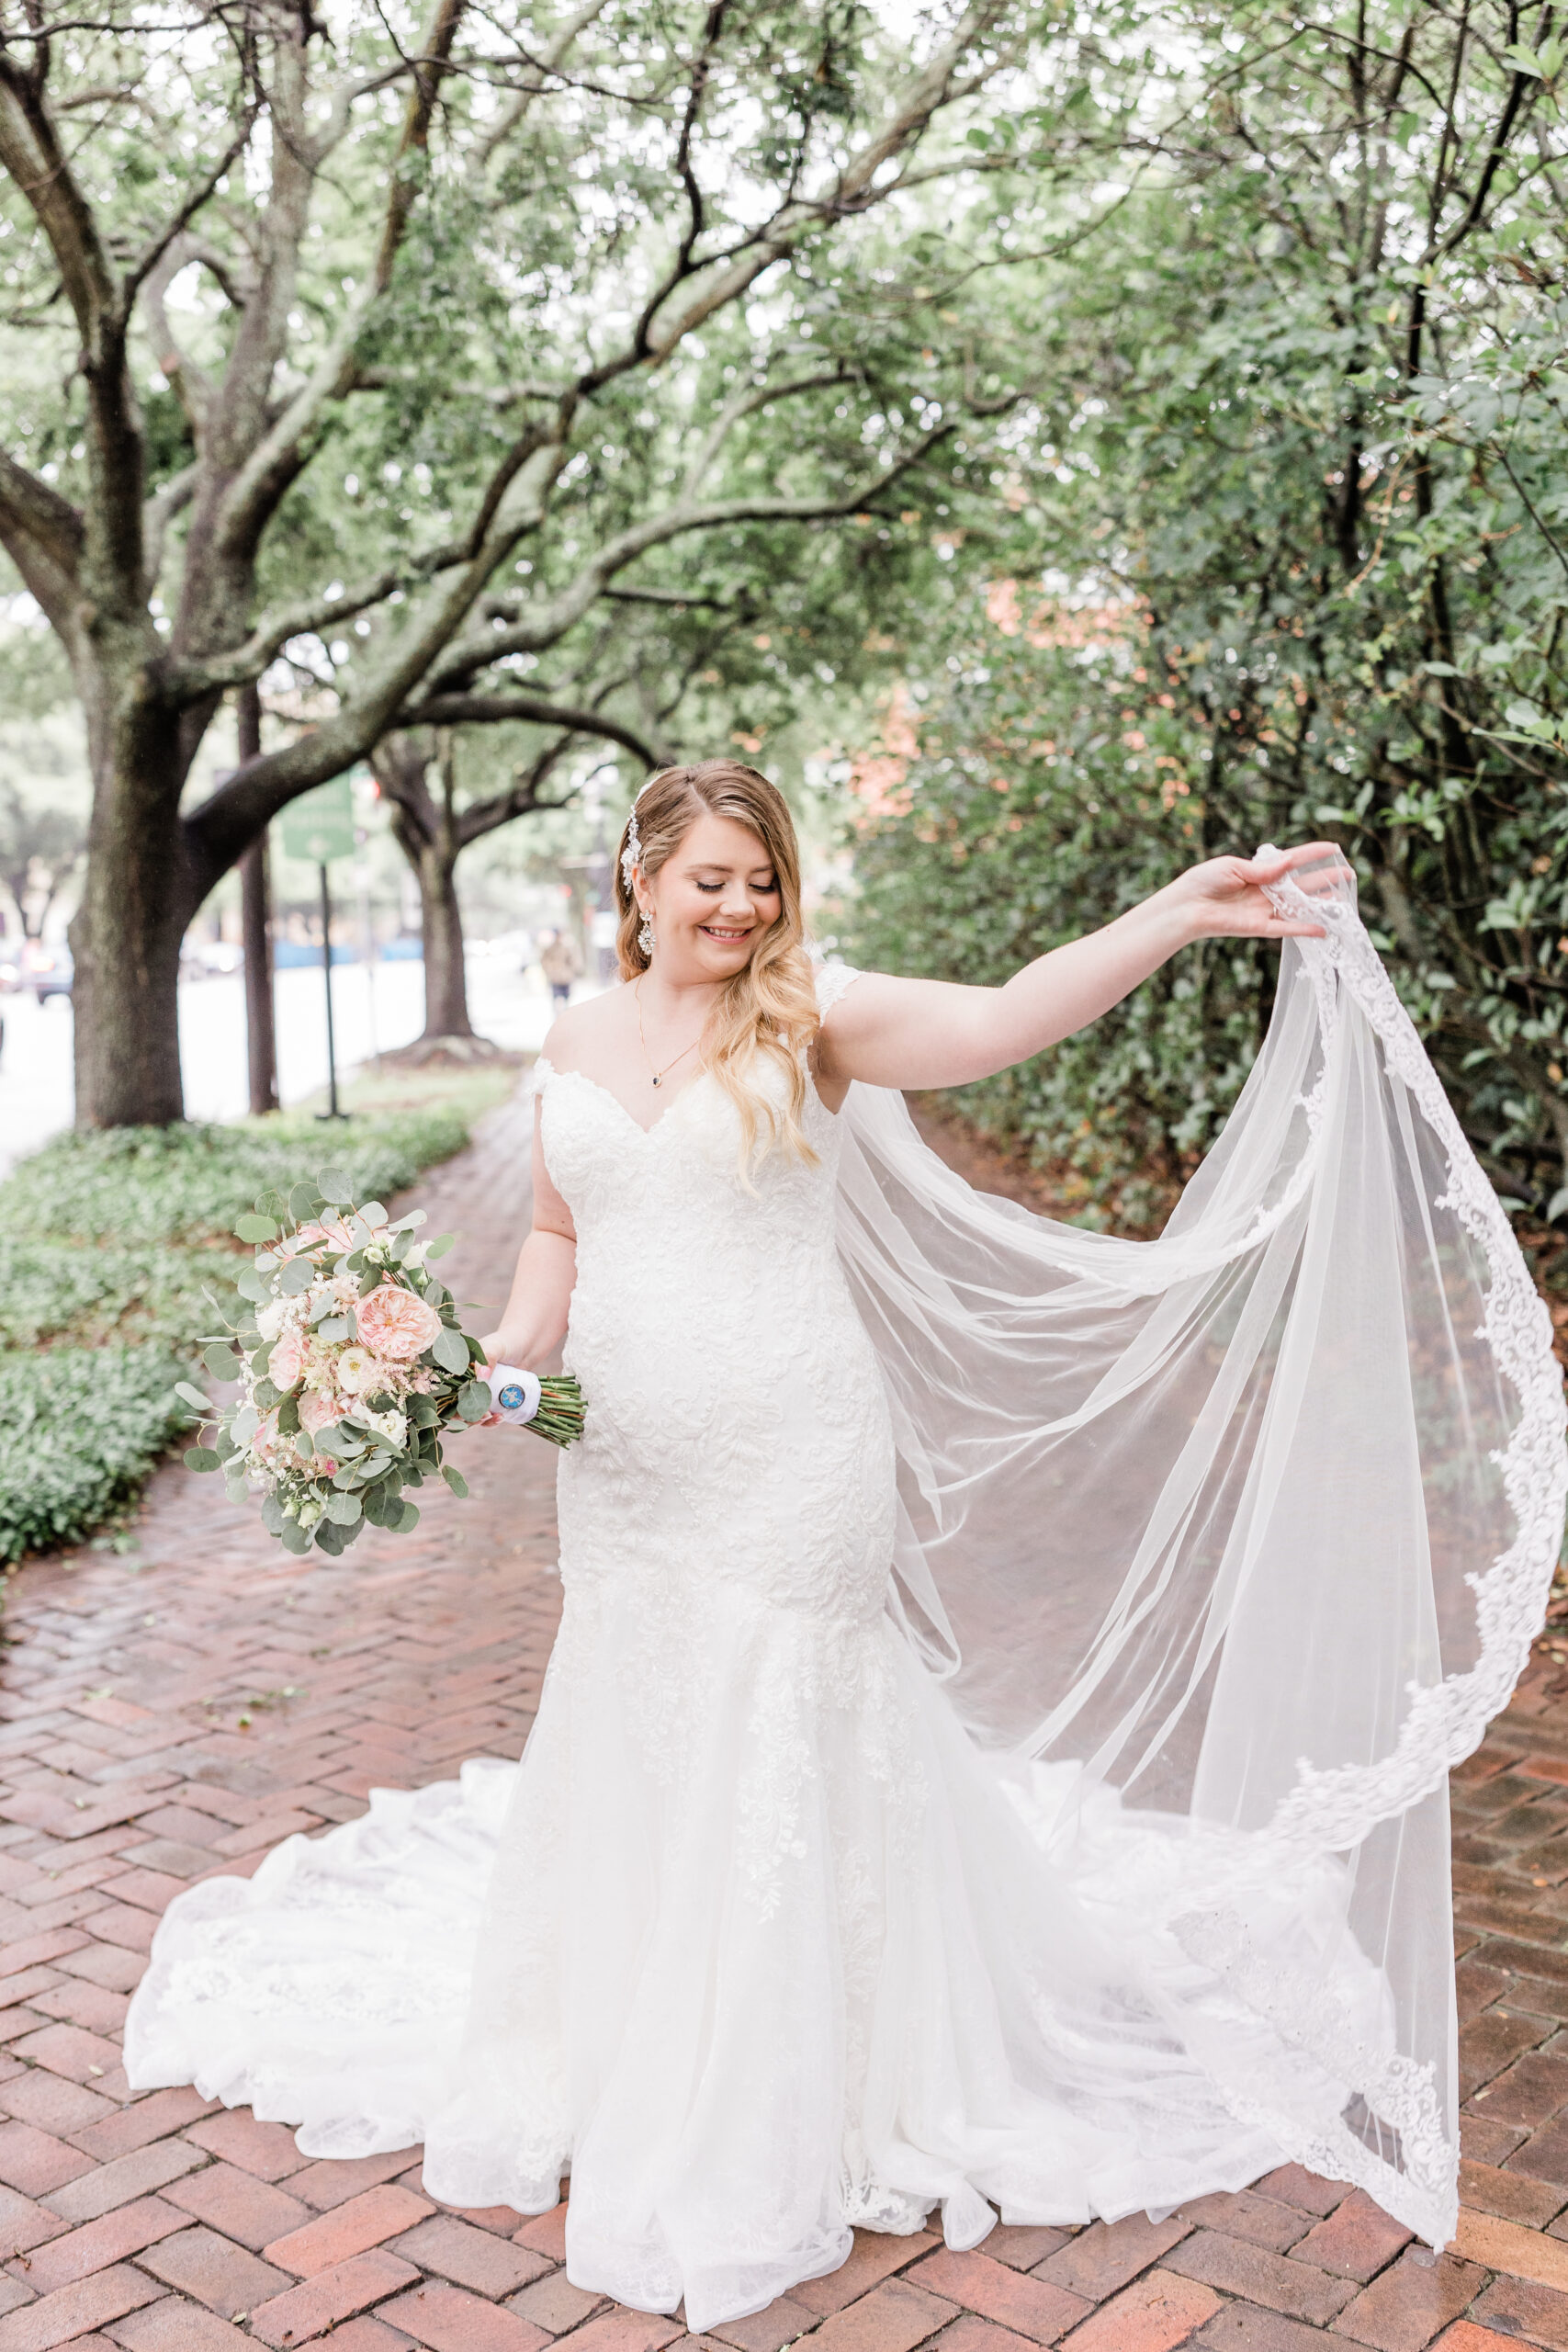 A bride is holding her veil in front of a brick walkway.